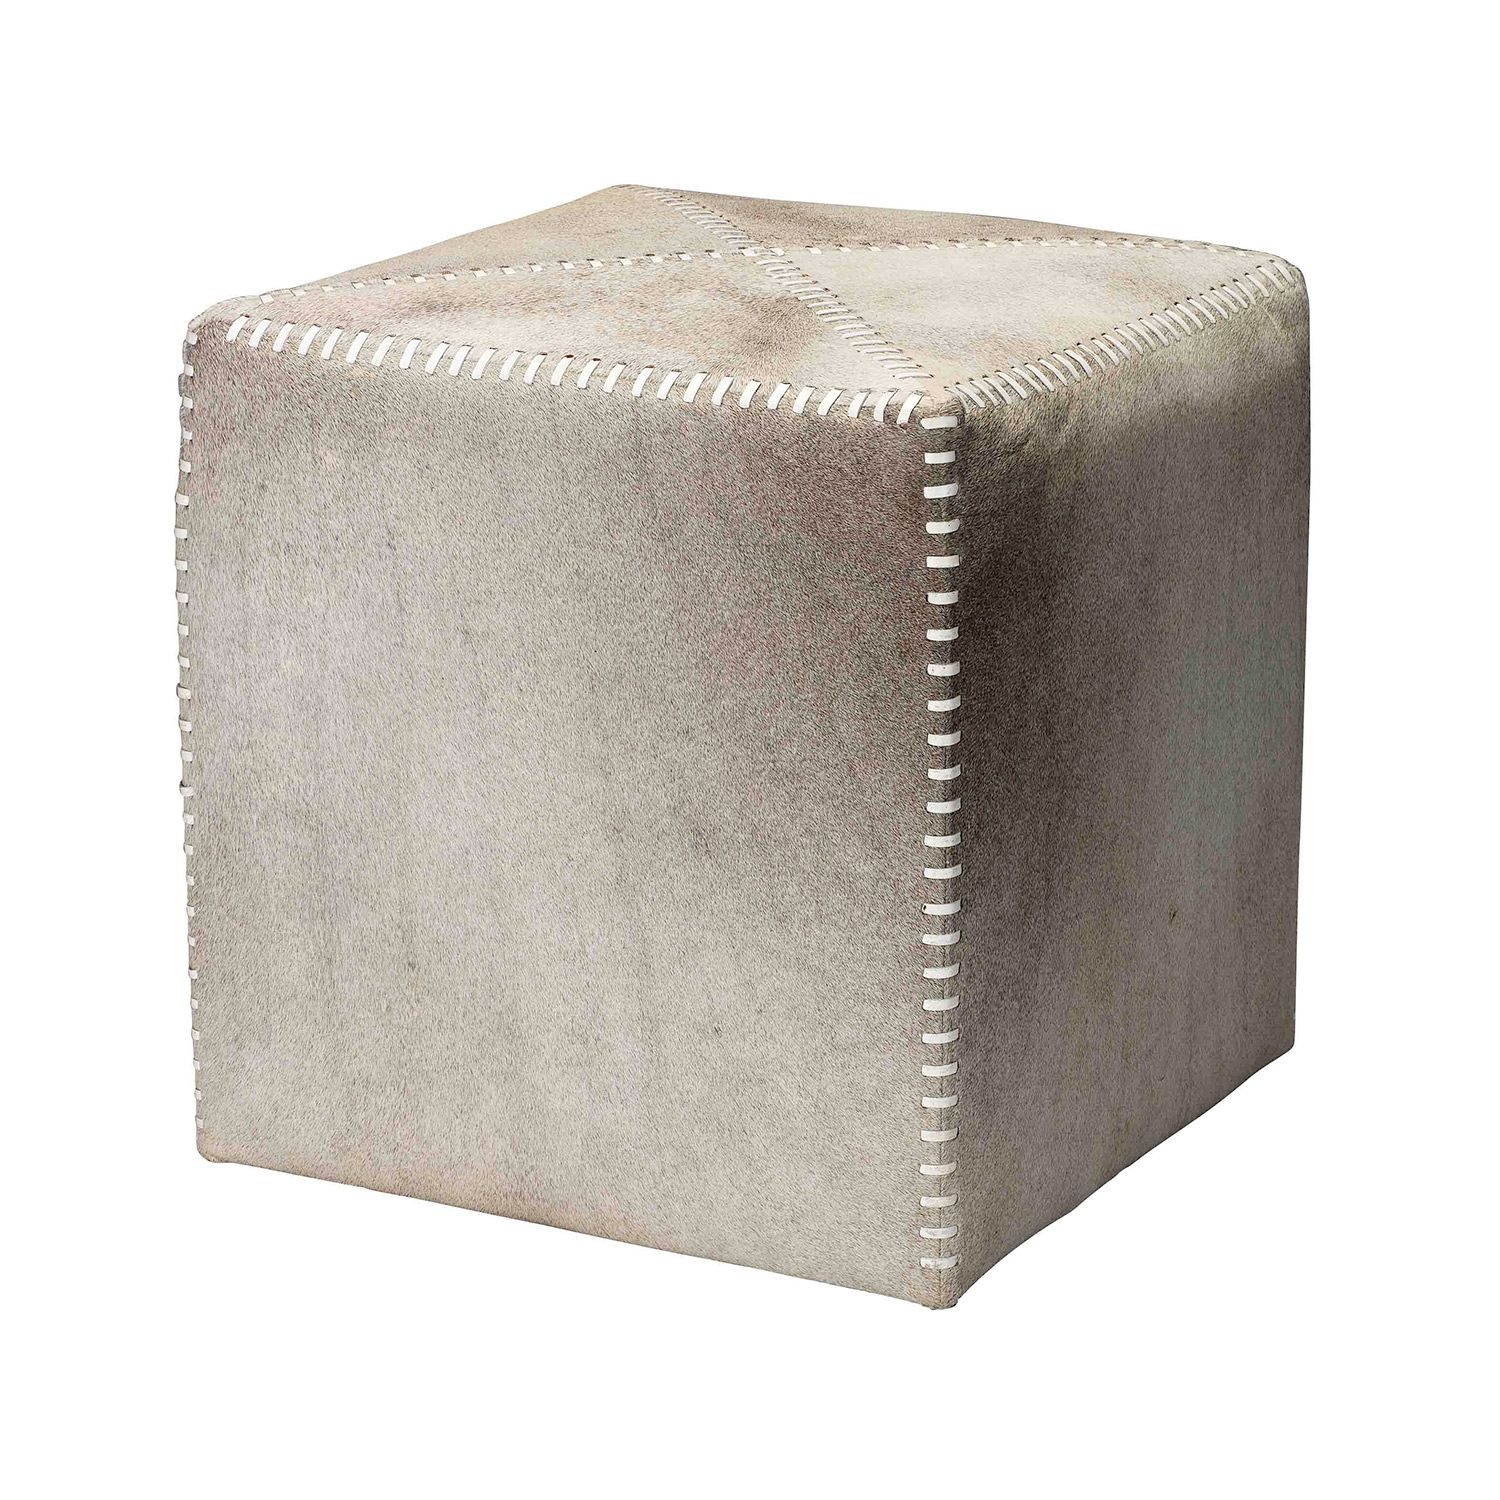 Jamie young company cross stitch leather cube ottoman